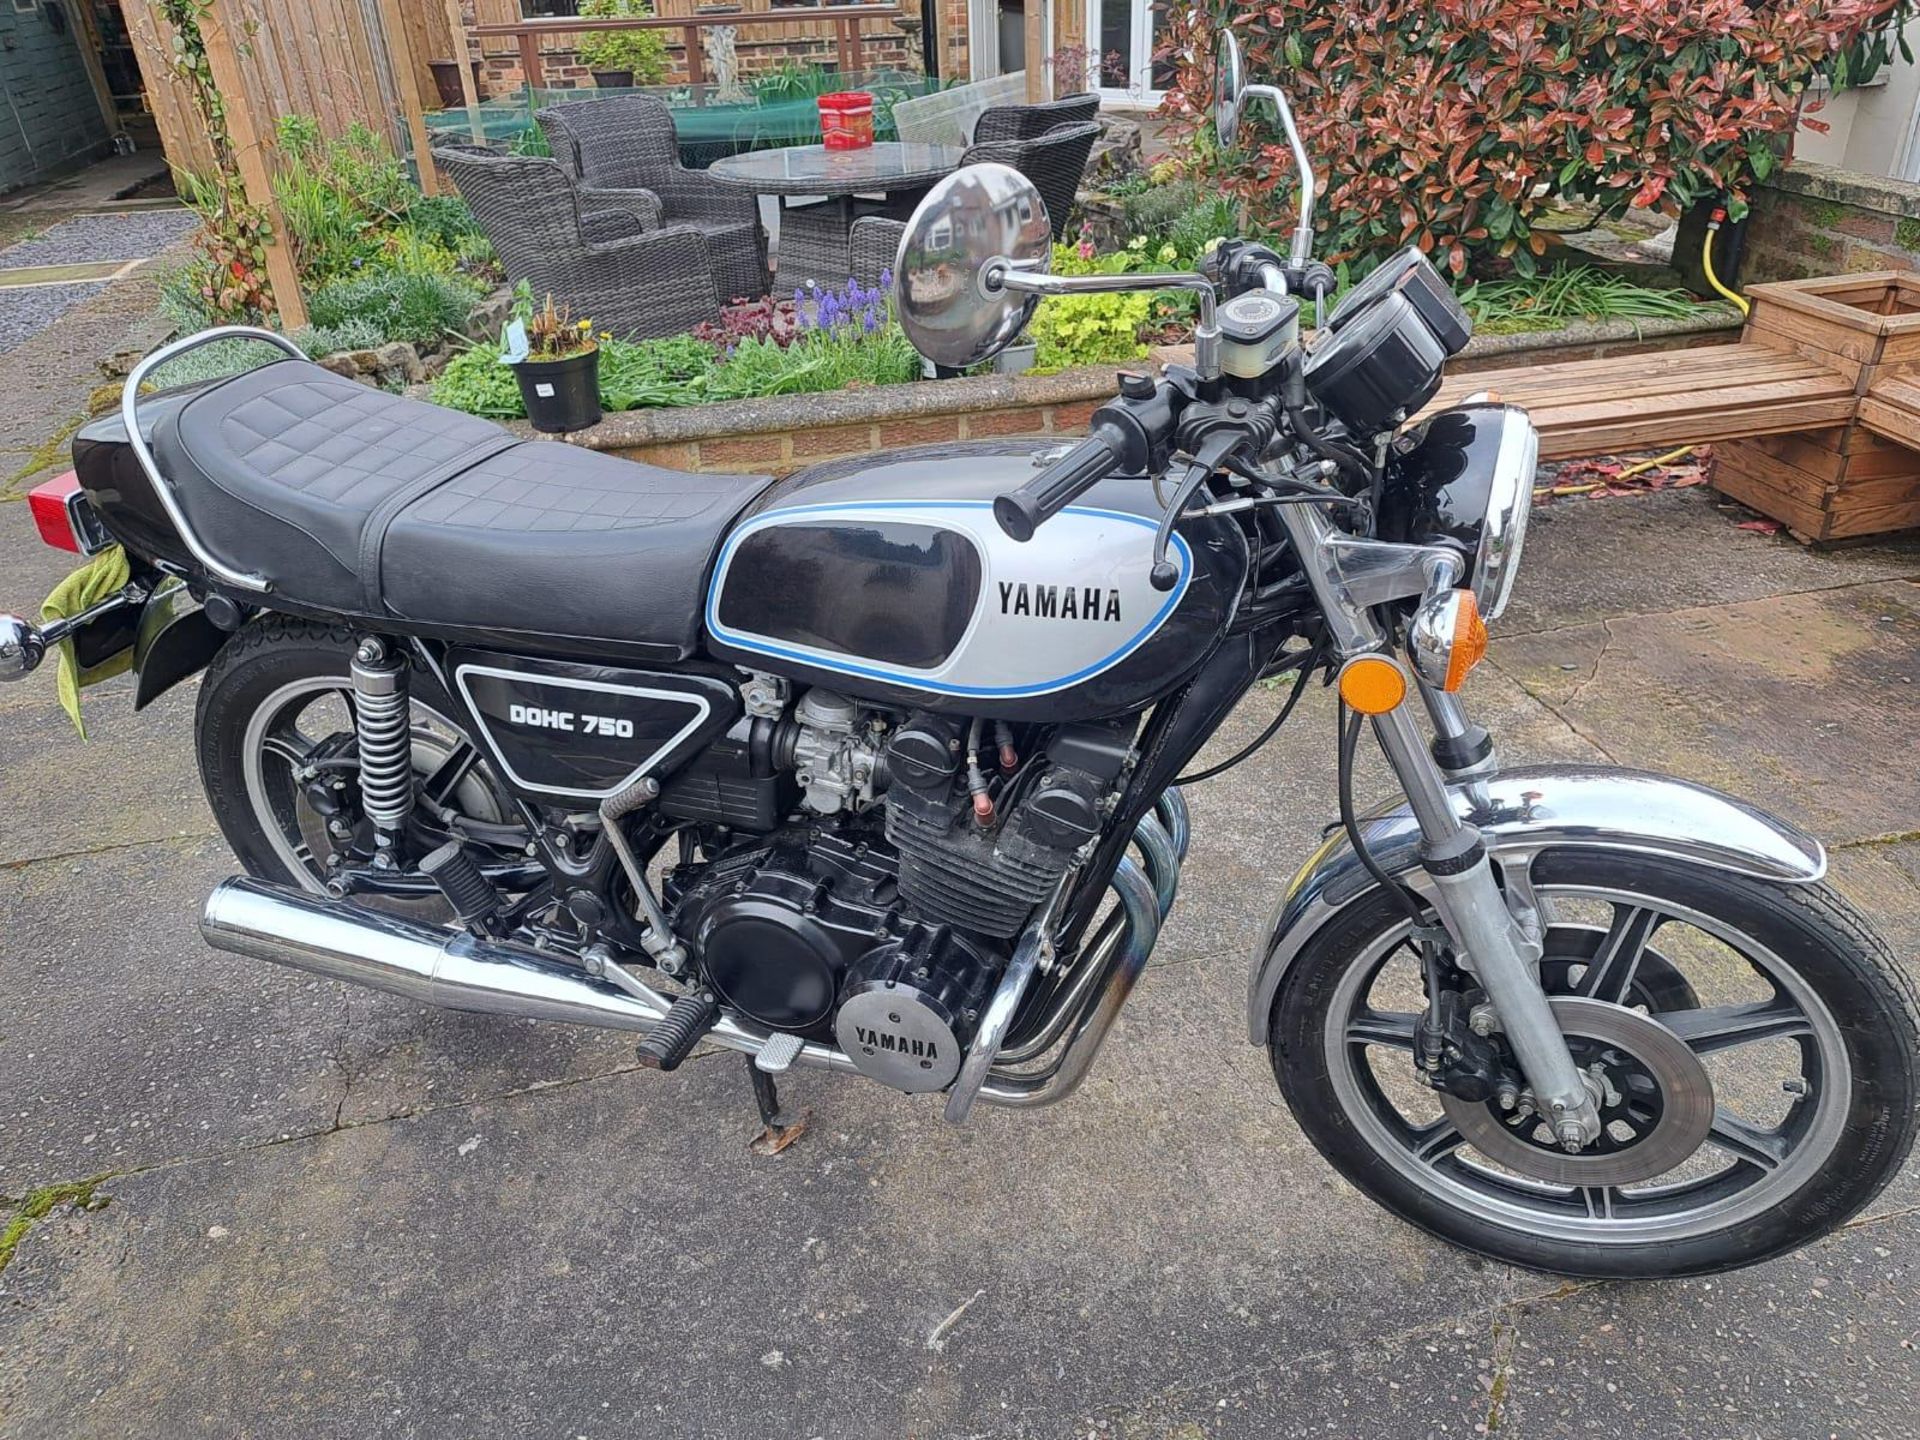 A 1978 YAMAHA XS 750 MOTORCYCLE, MILEAGE AT CATALOGING ONLY 8542, TWO OWNERS - ON A V5C, VENDOR - Image 2 of 5